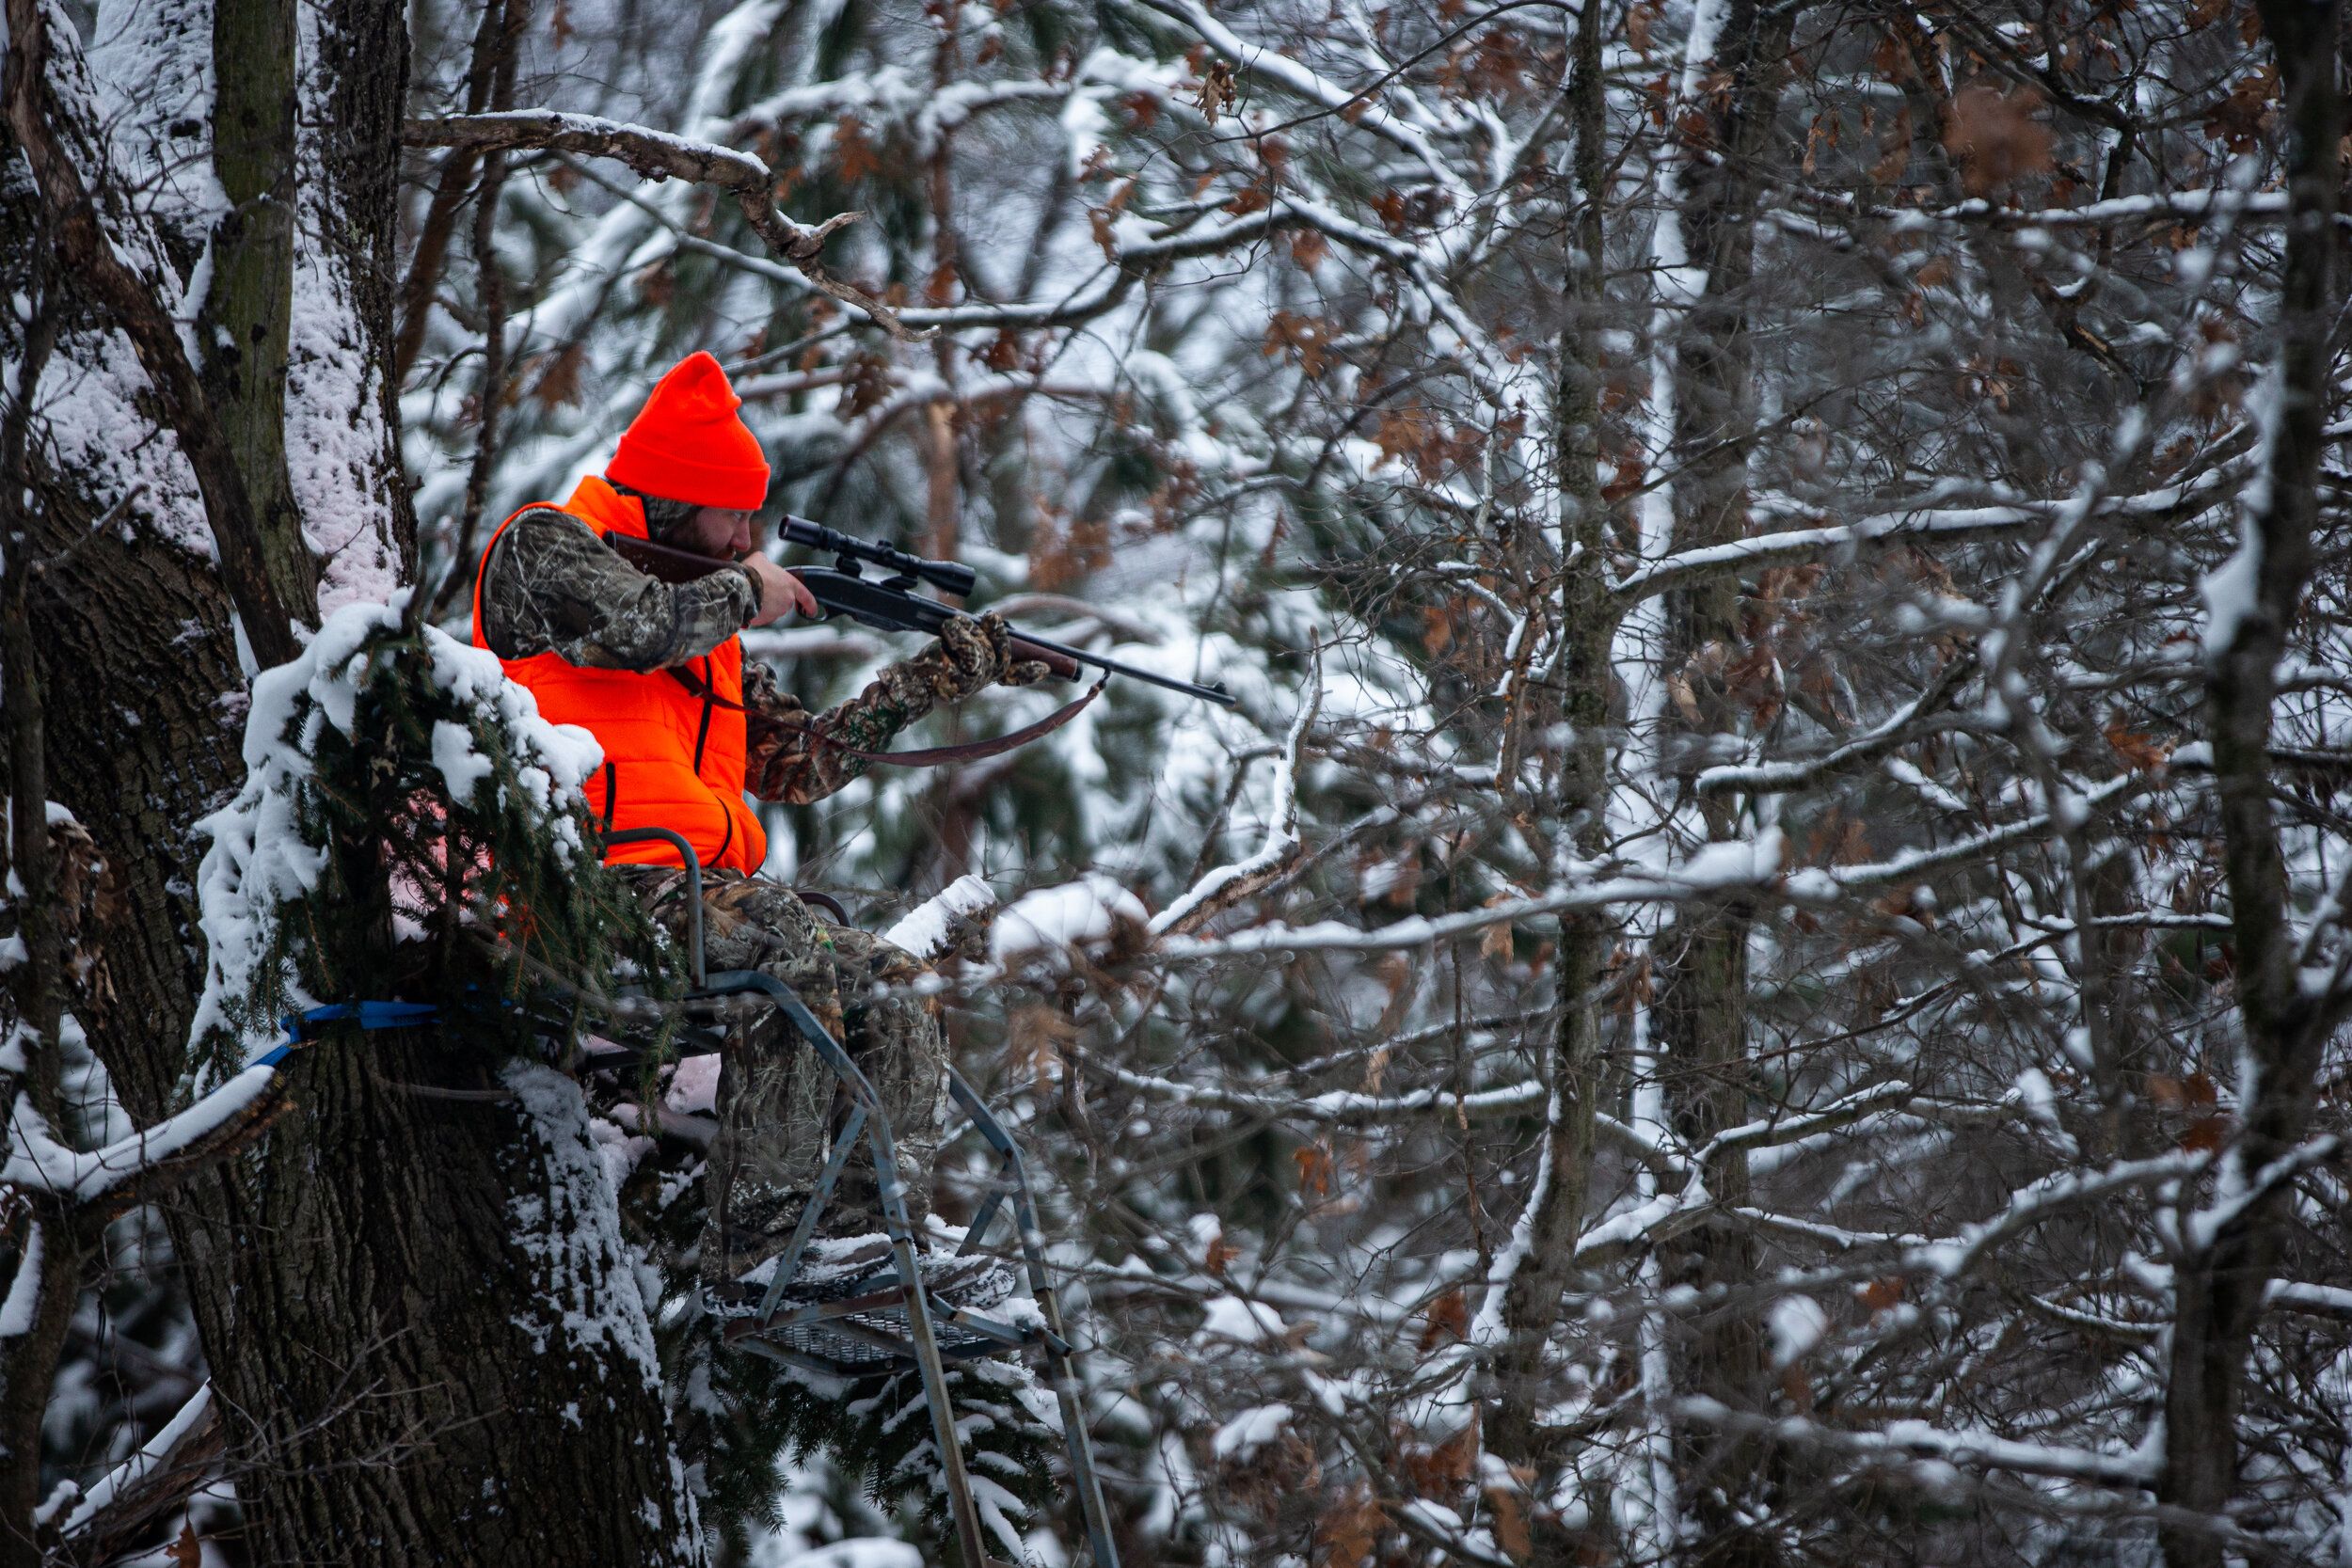 The Ideal Conditions for Late-Season Deer Hunts